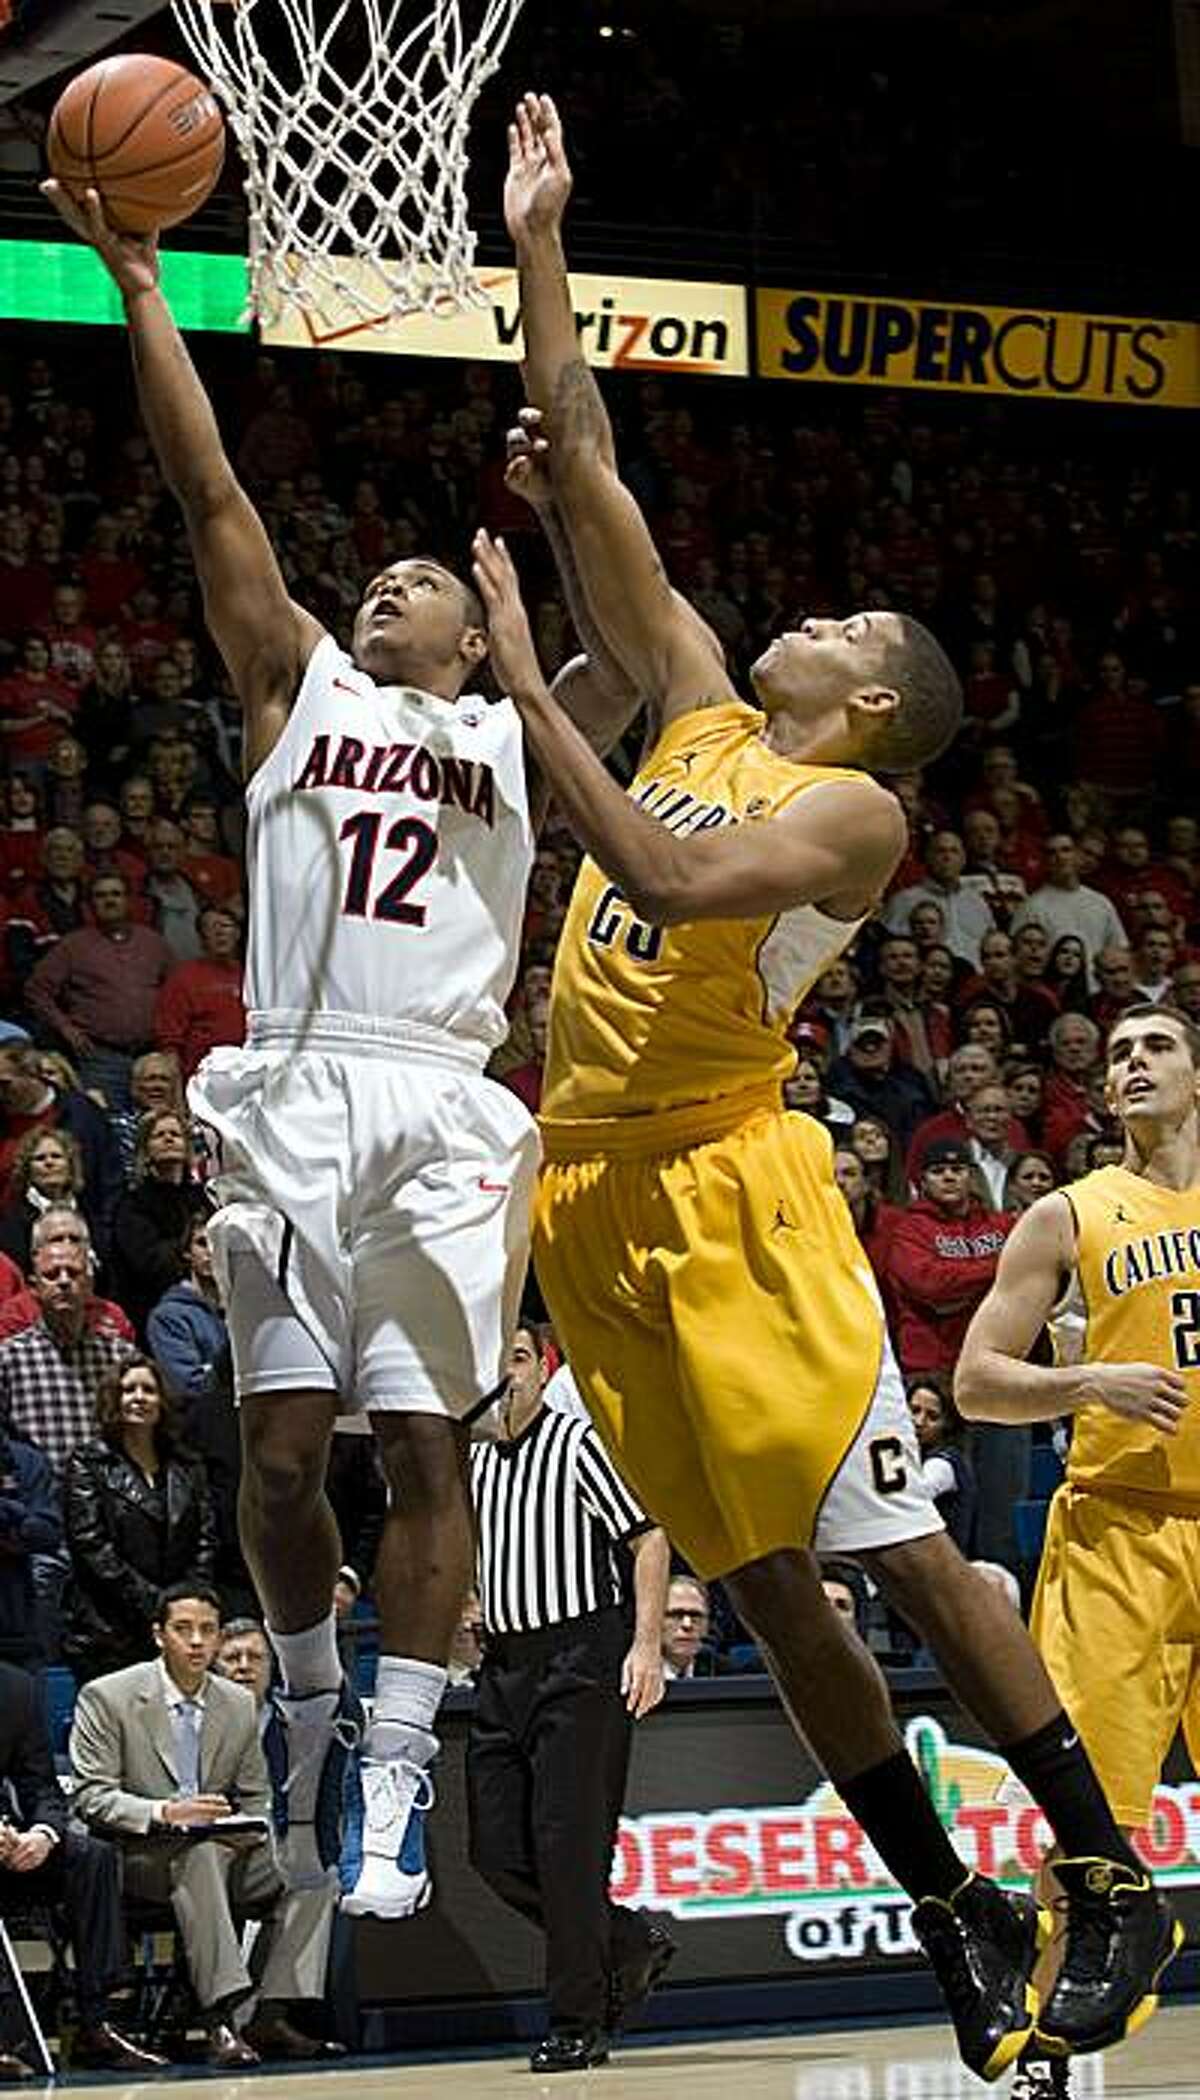 Arizona's Lamont Jones (12) shoots over California's Allen Crabbe (23) during the first half of an NCAA college basketball game at McKale Center in Tucson, Ariz., Thursday, Jan. 6, 2011.